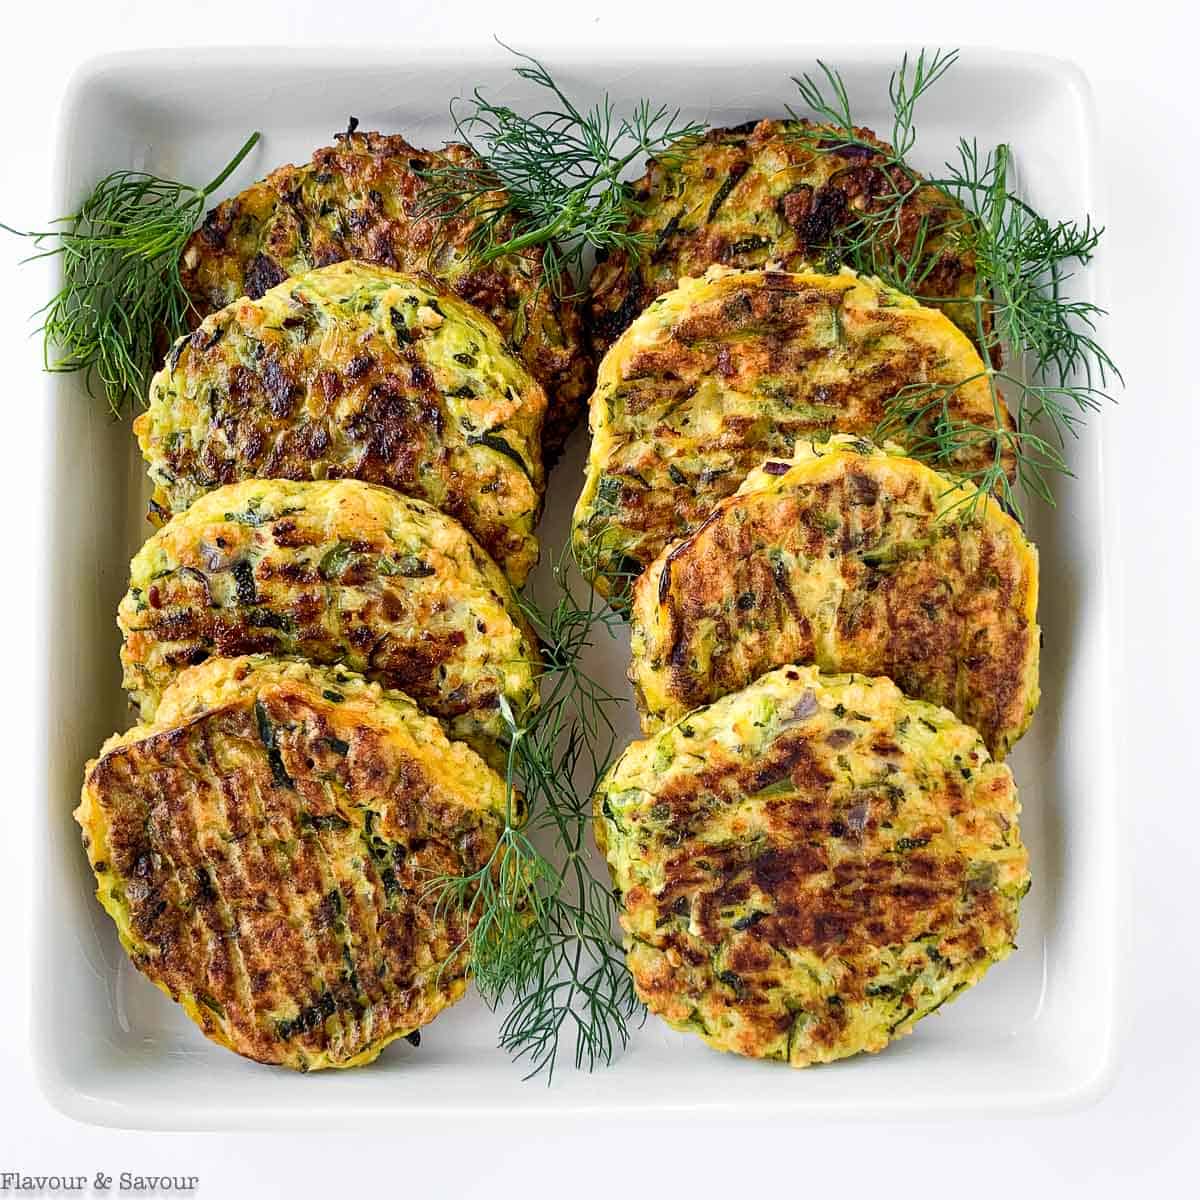 8 gluten-free zucchini patties on a plate with fresh herbs.